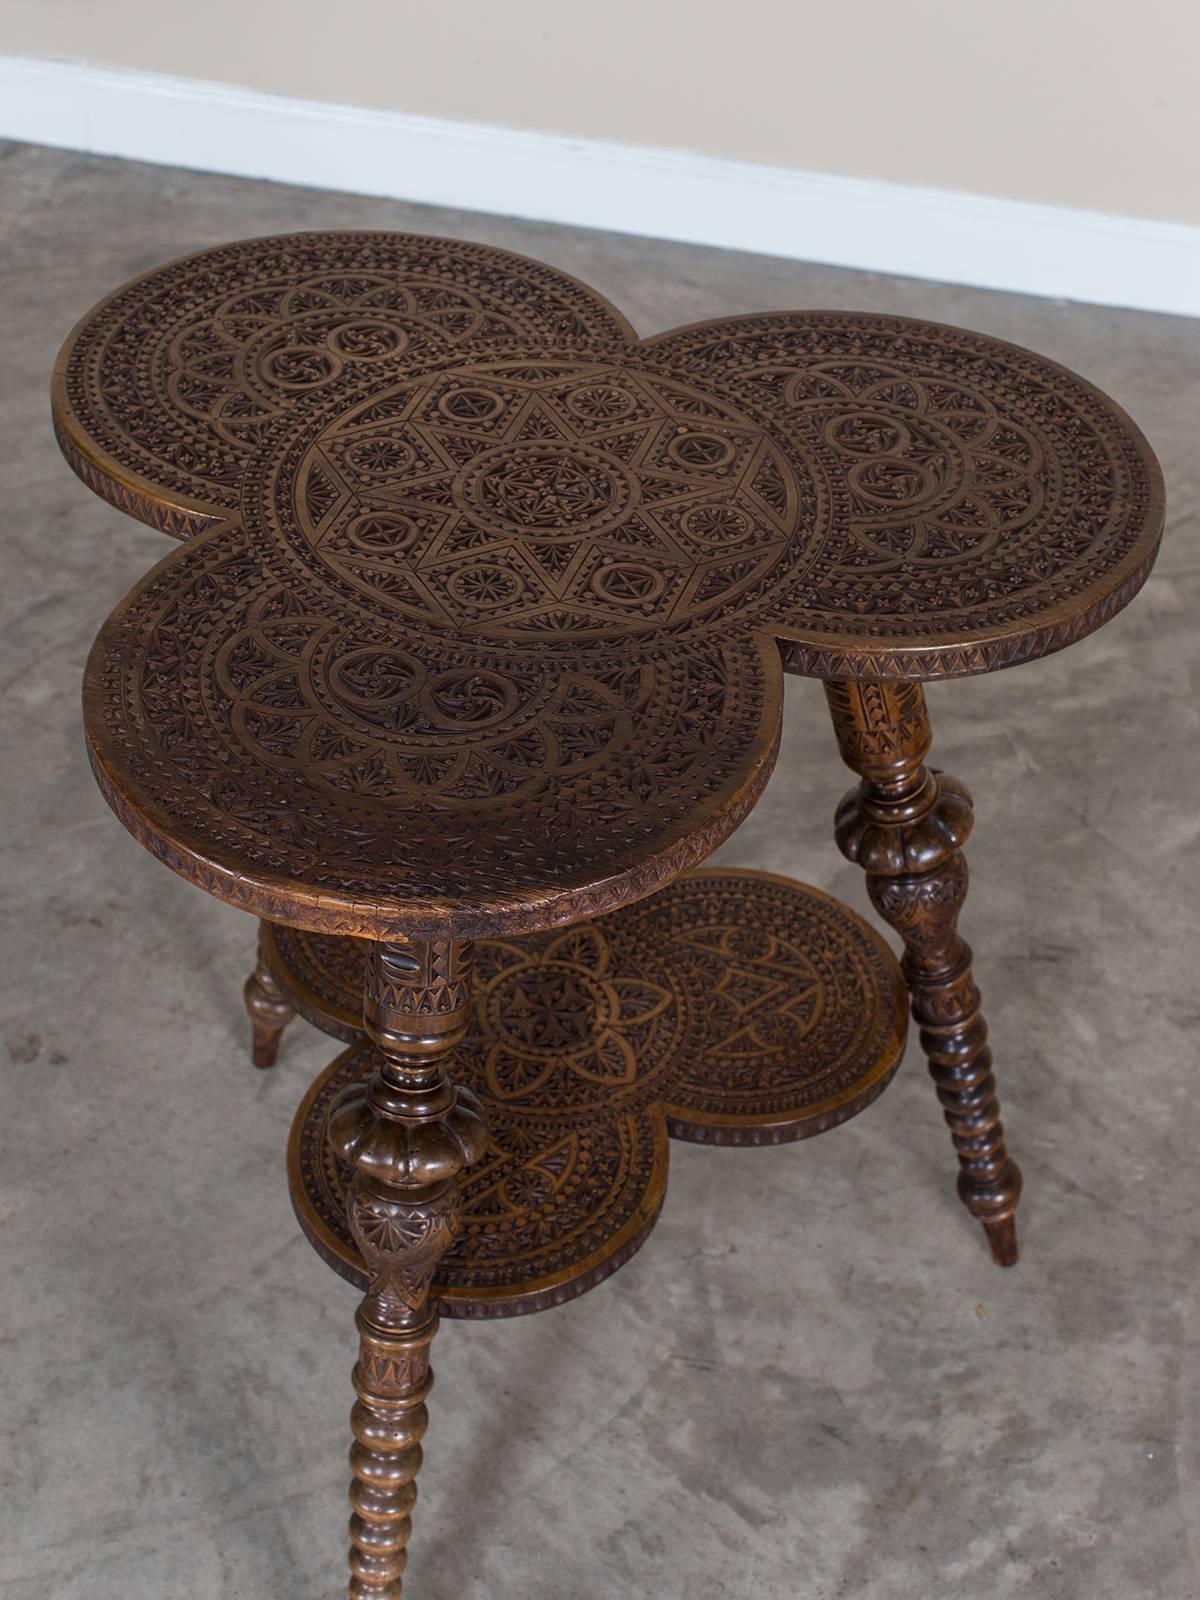 Receive our new selections direct from 1stdibs by email each week. Please click Follow Dealer below and see them first!

The wonderfully intricate carved detail on this antique English oak side table circa 1885 is visible from every direction. The